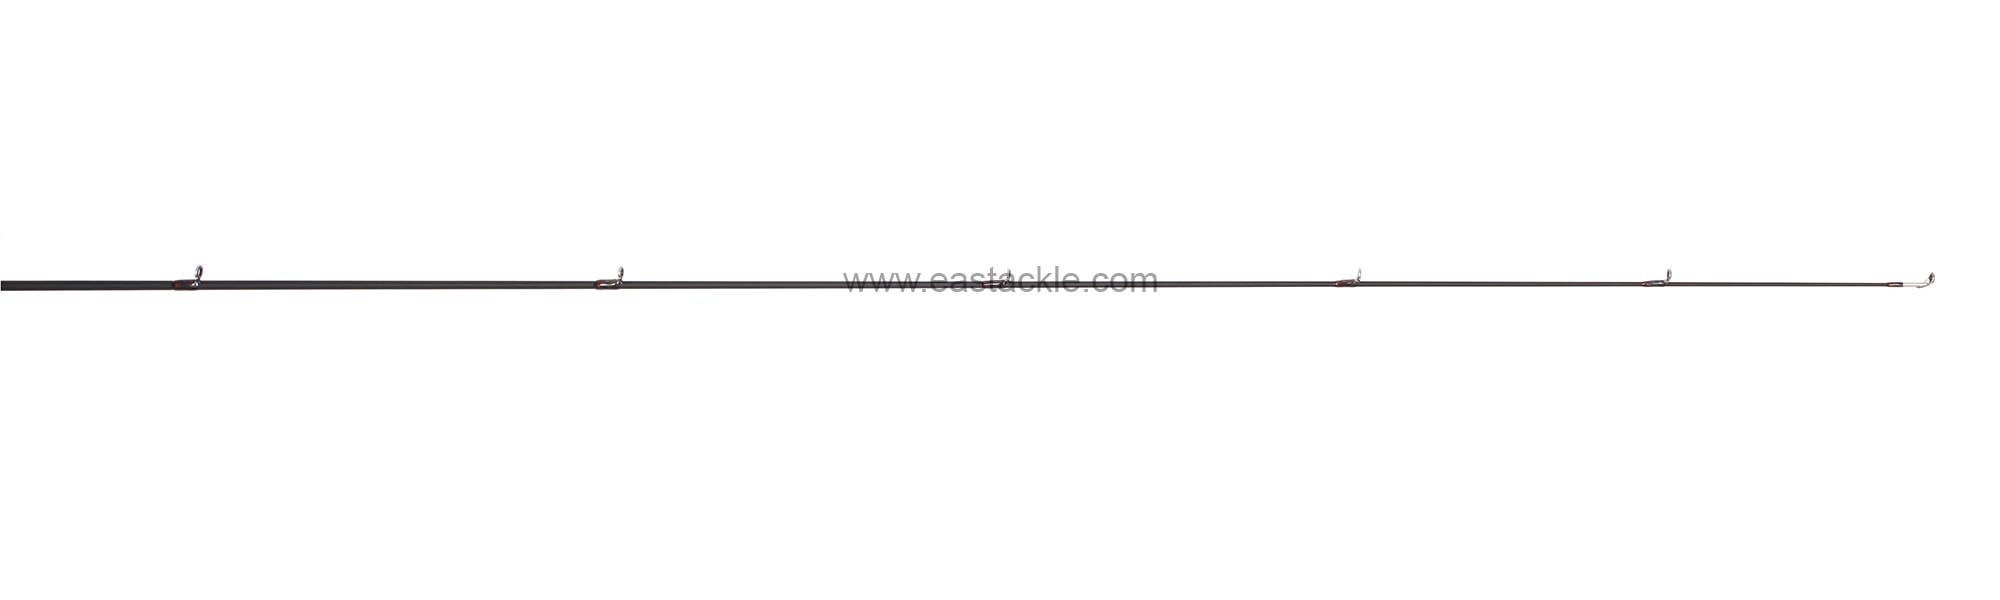 Storm - Teenie - TNC642UL - Bait Casting Rod - Tip Section (Side View) | Eastackle